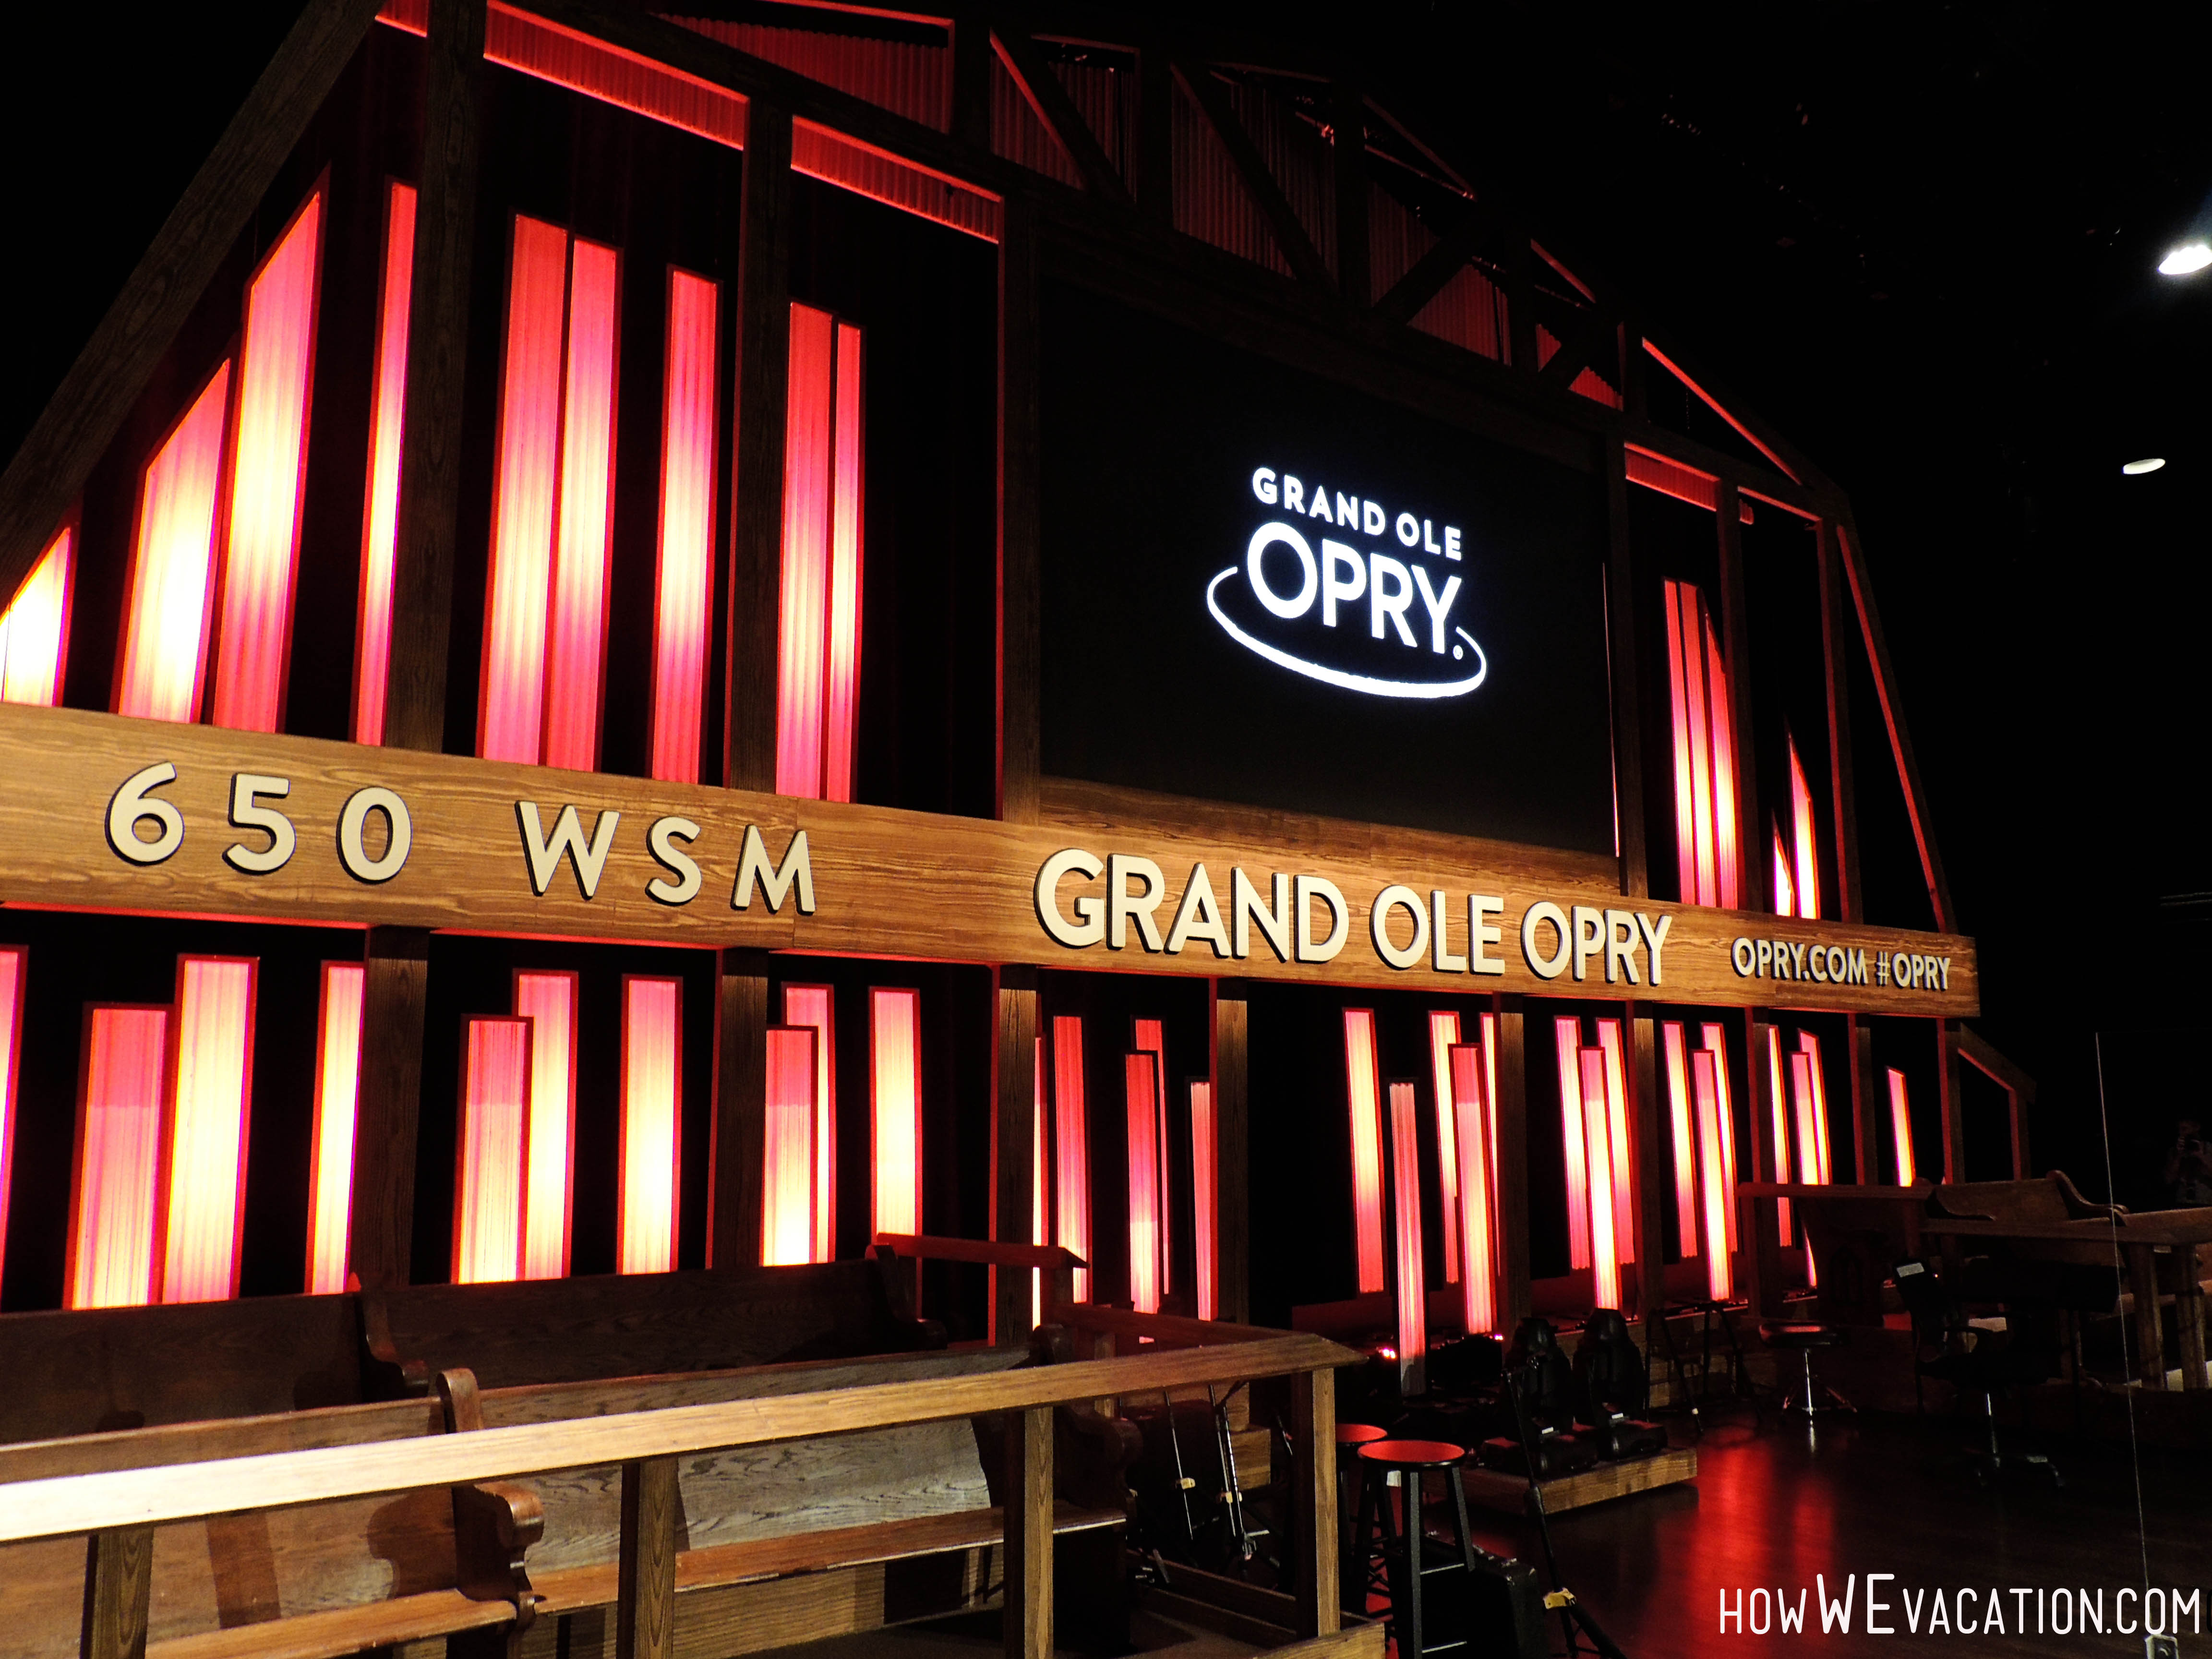 How WE do the Grand Ole Opry! 8 things you'll discover at Nashville's